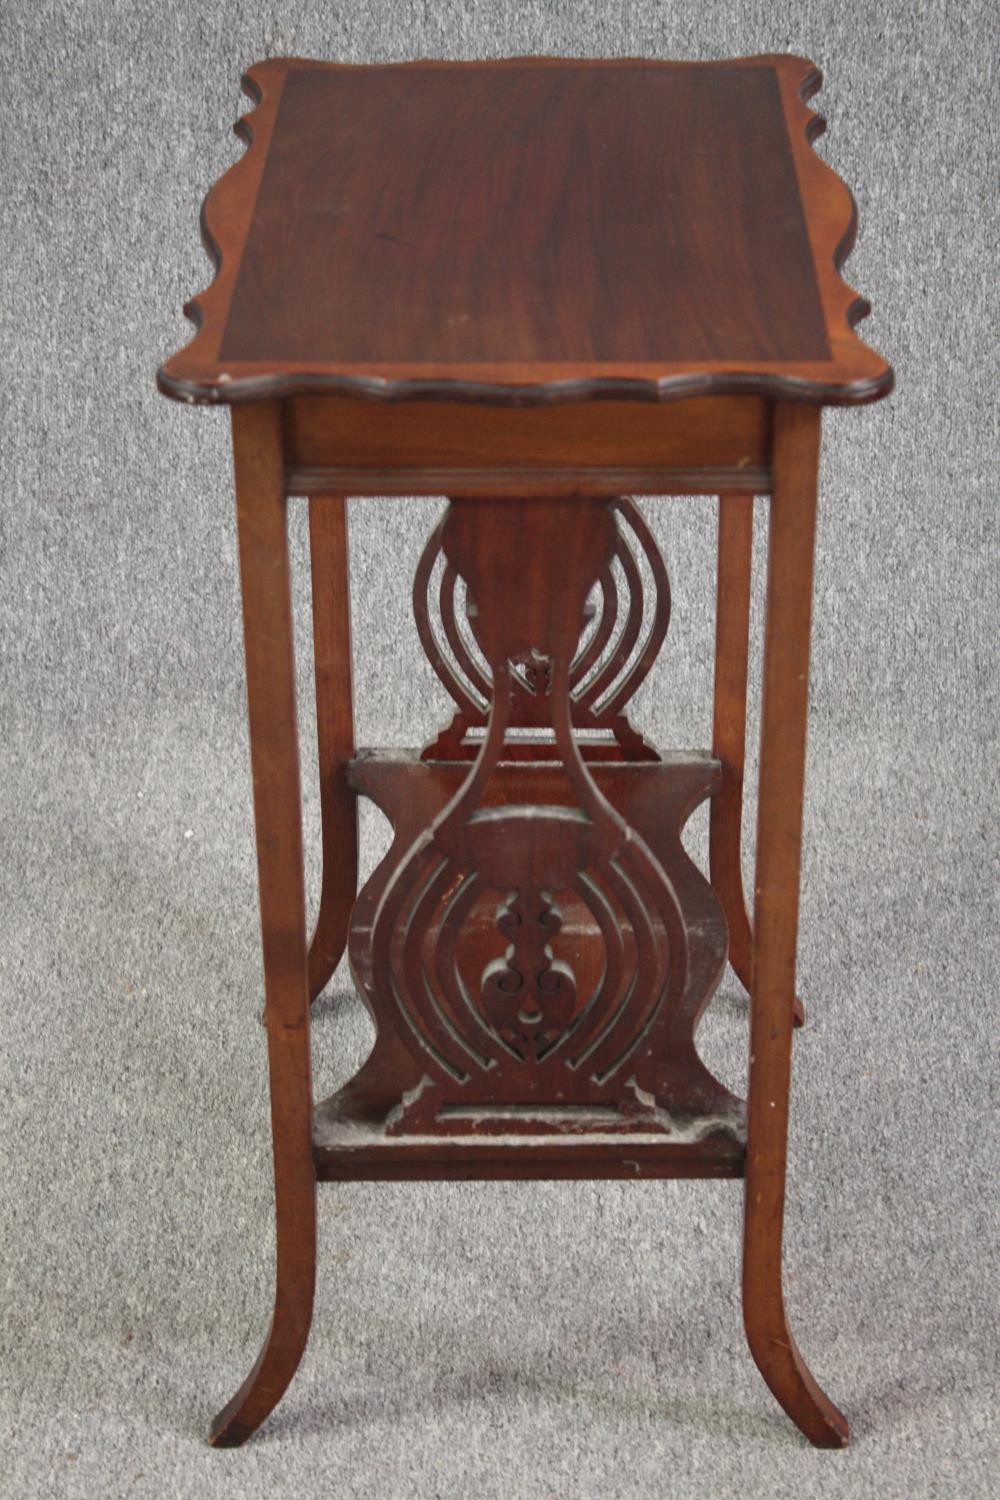 Occasional or lamp table, late 19th century Art Nouveau style. H.74 W.55 D.38cm. - Image 4 of 5